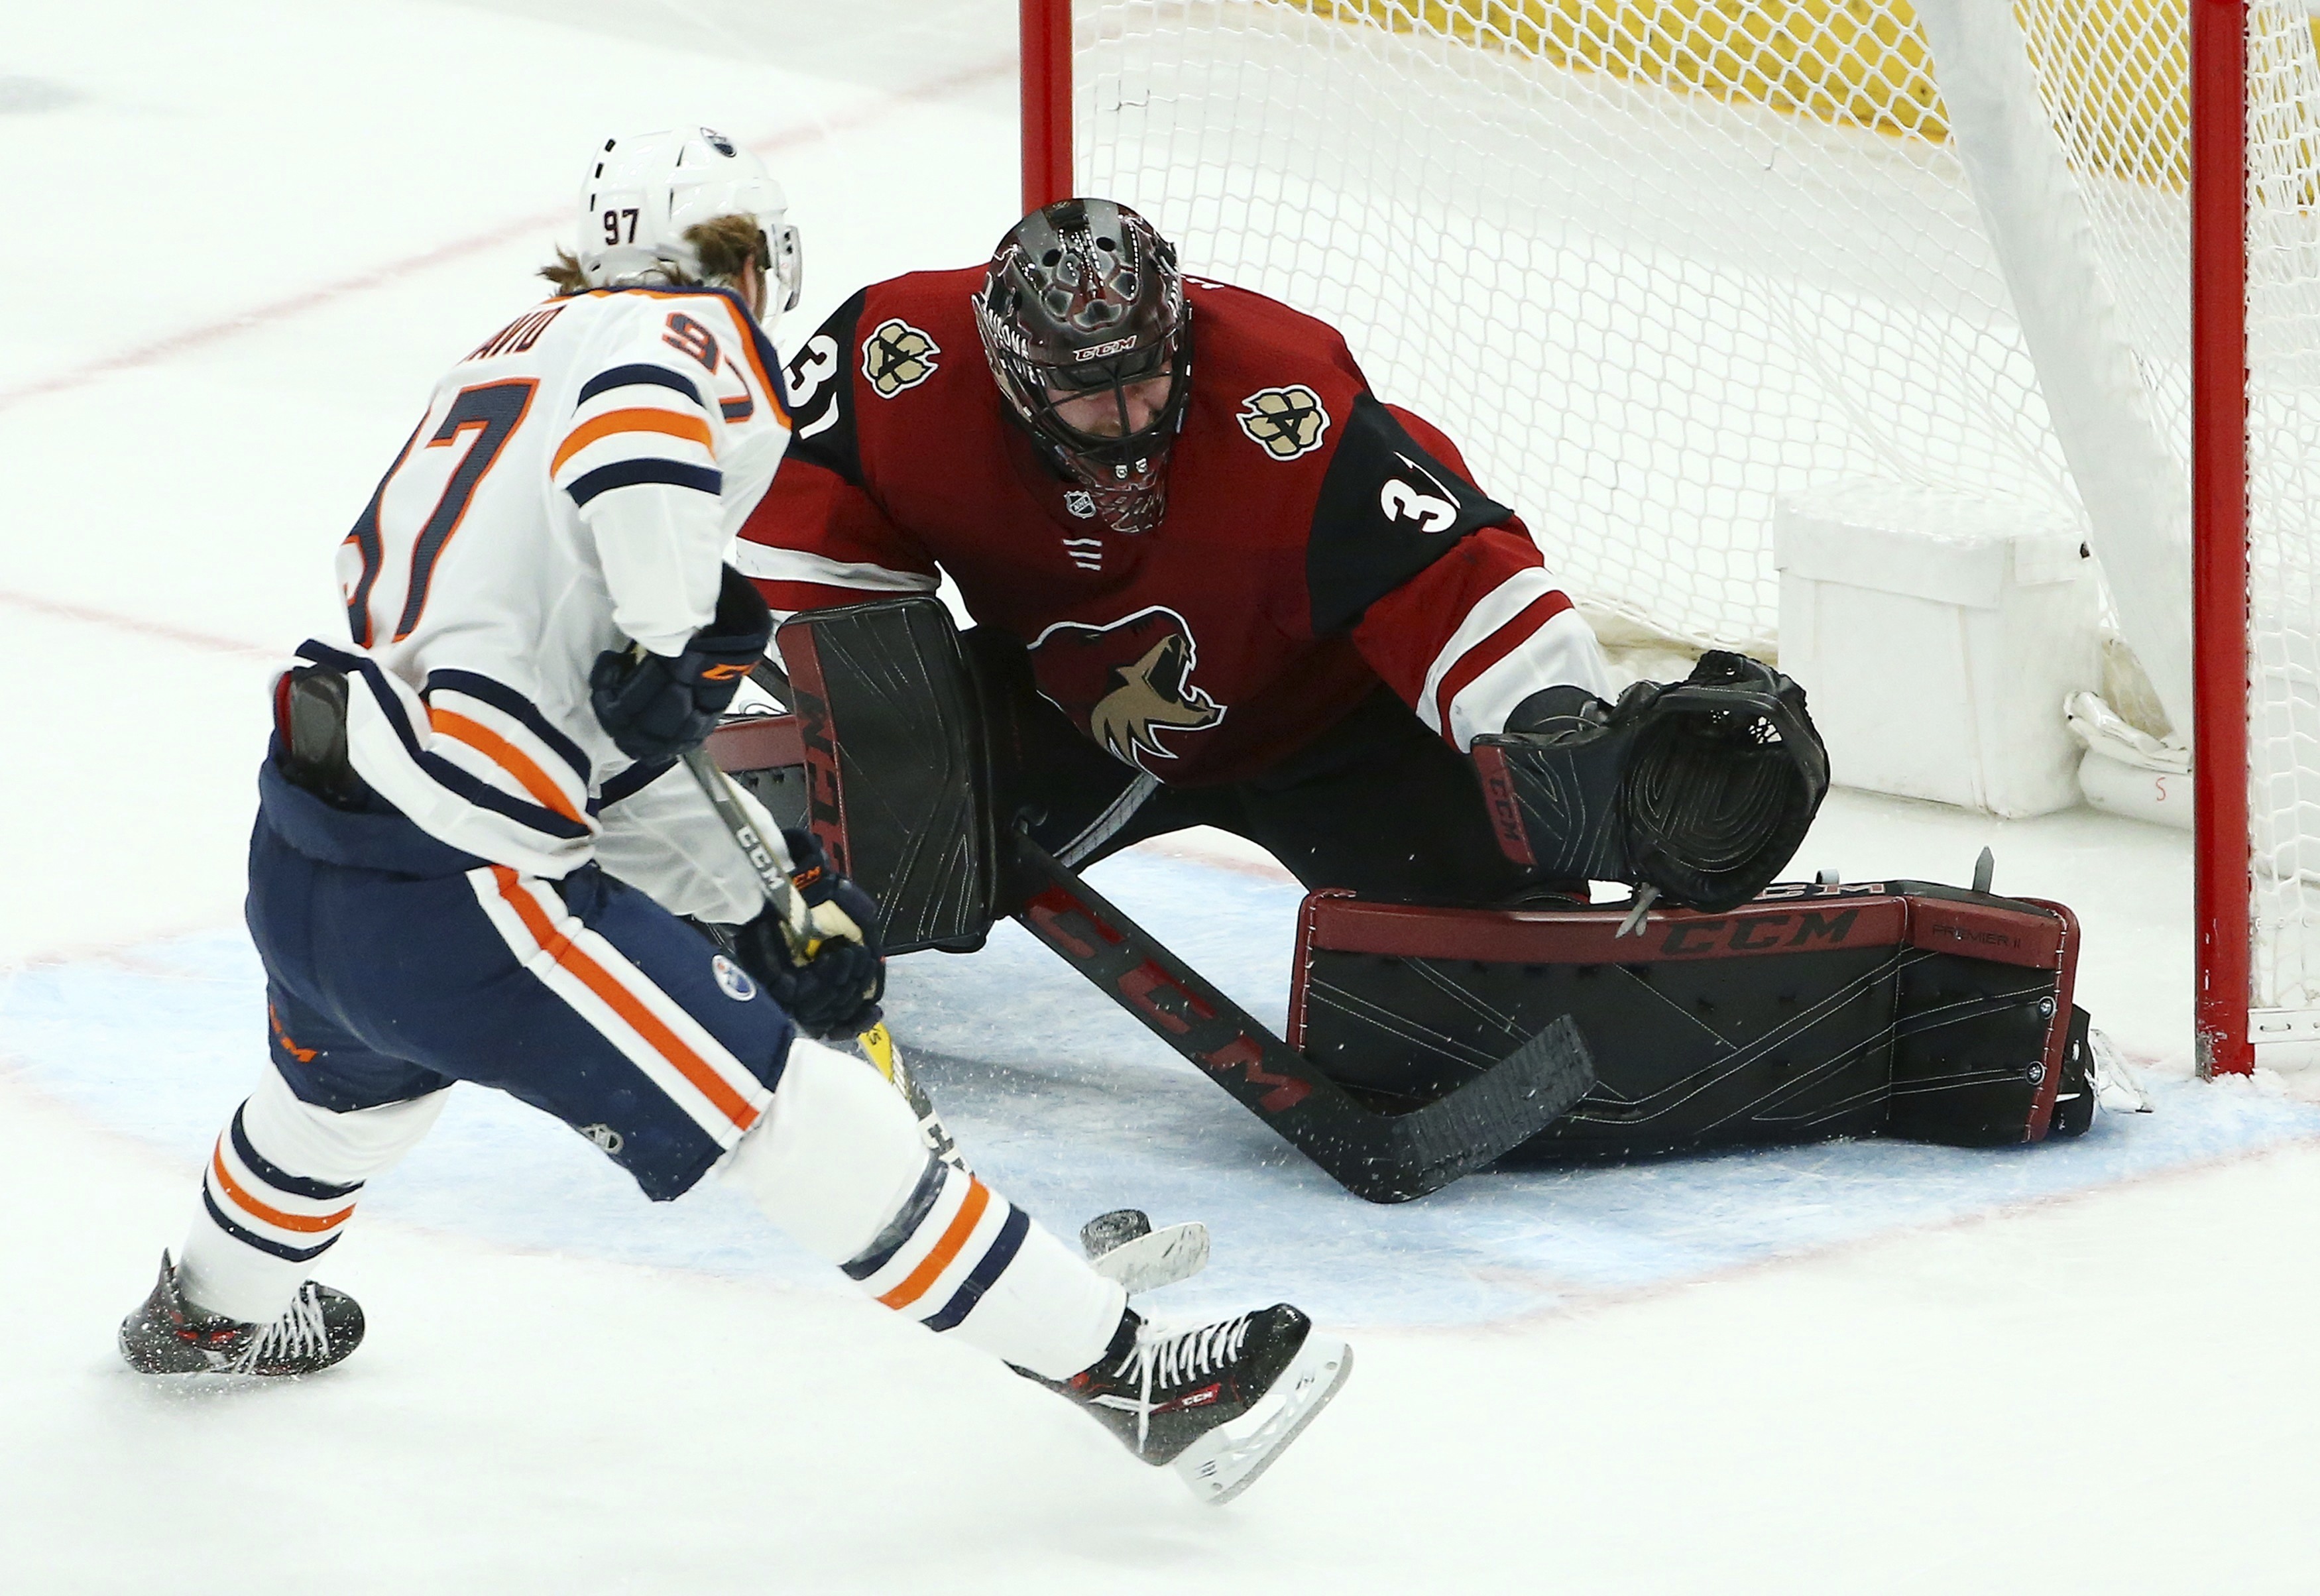 McDavid scores twice as Oilers top Coyotes 3-1 to stop skid